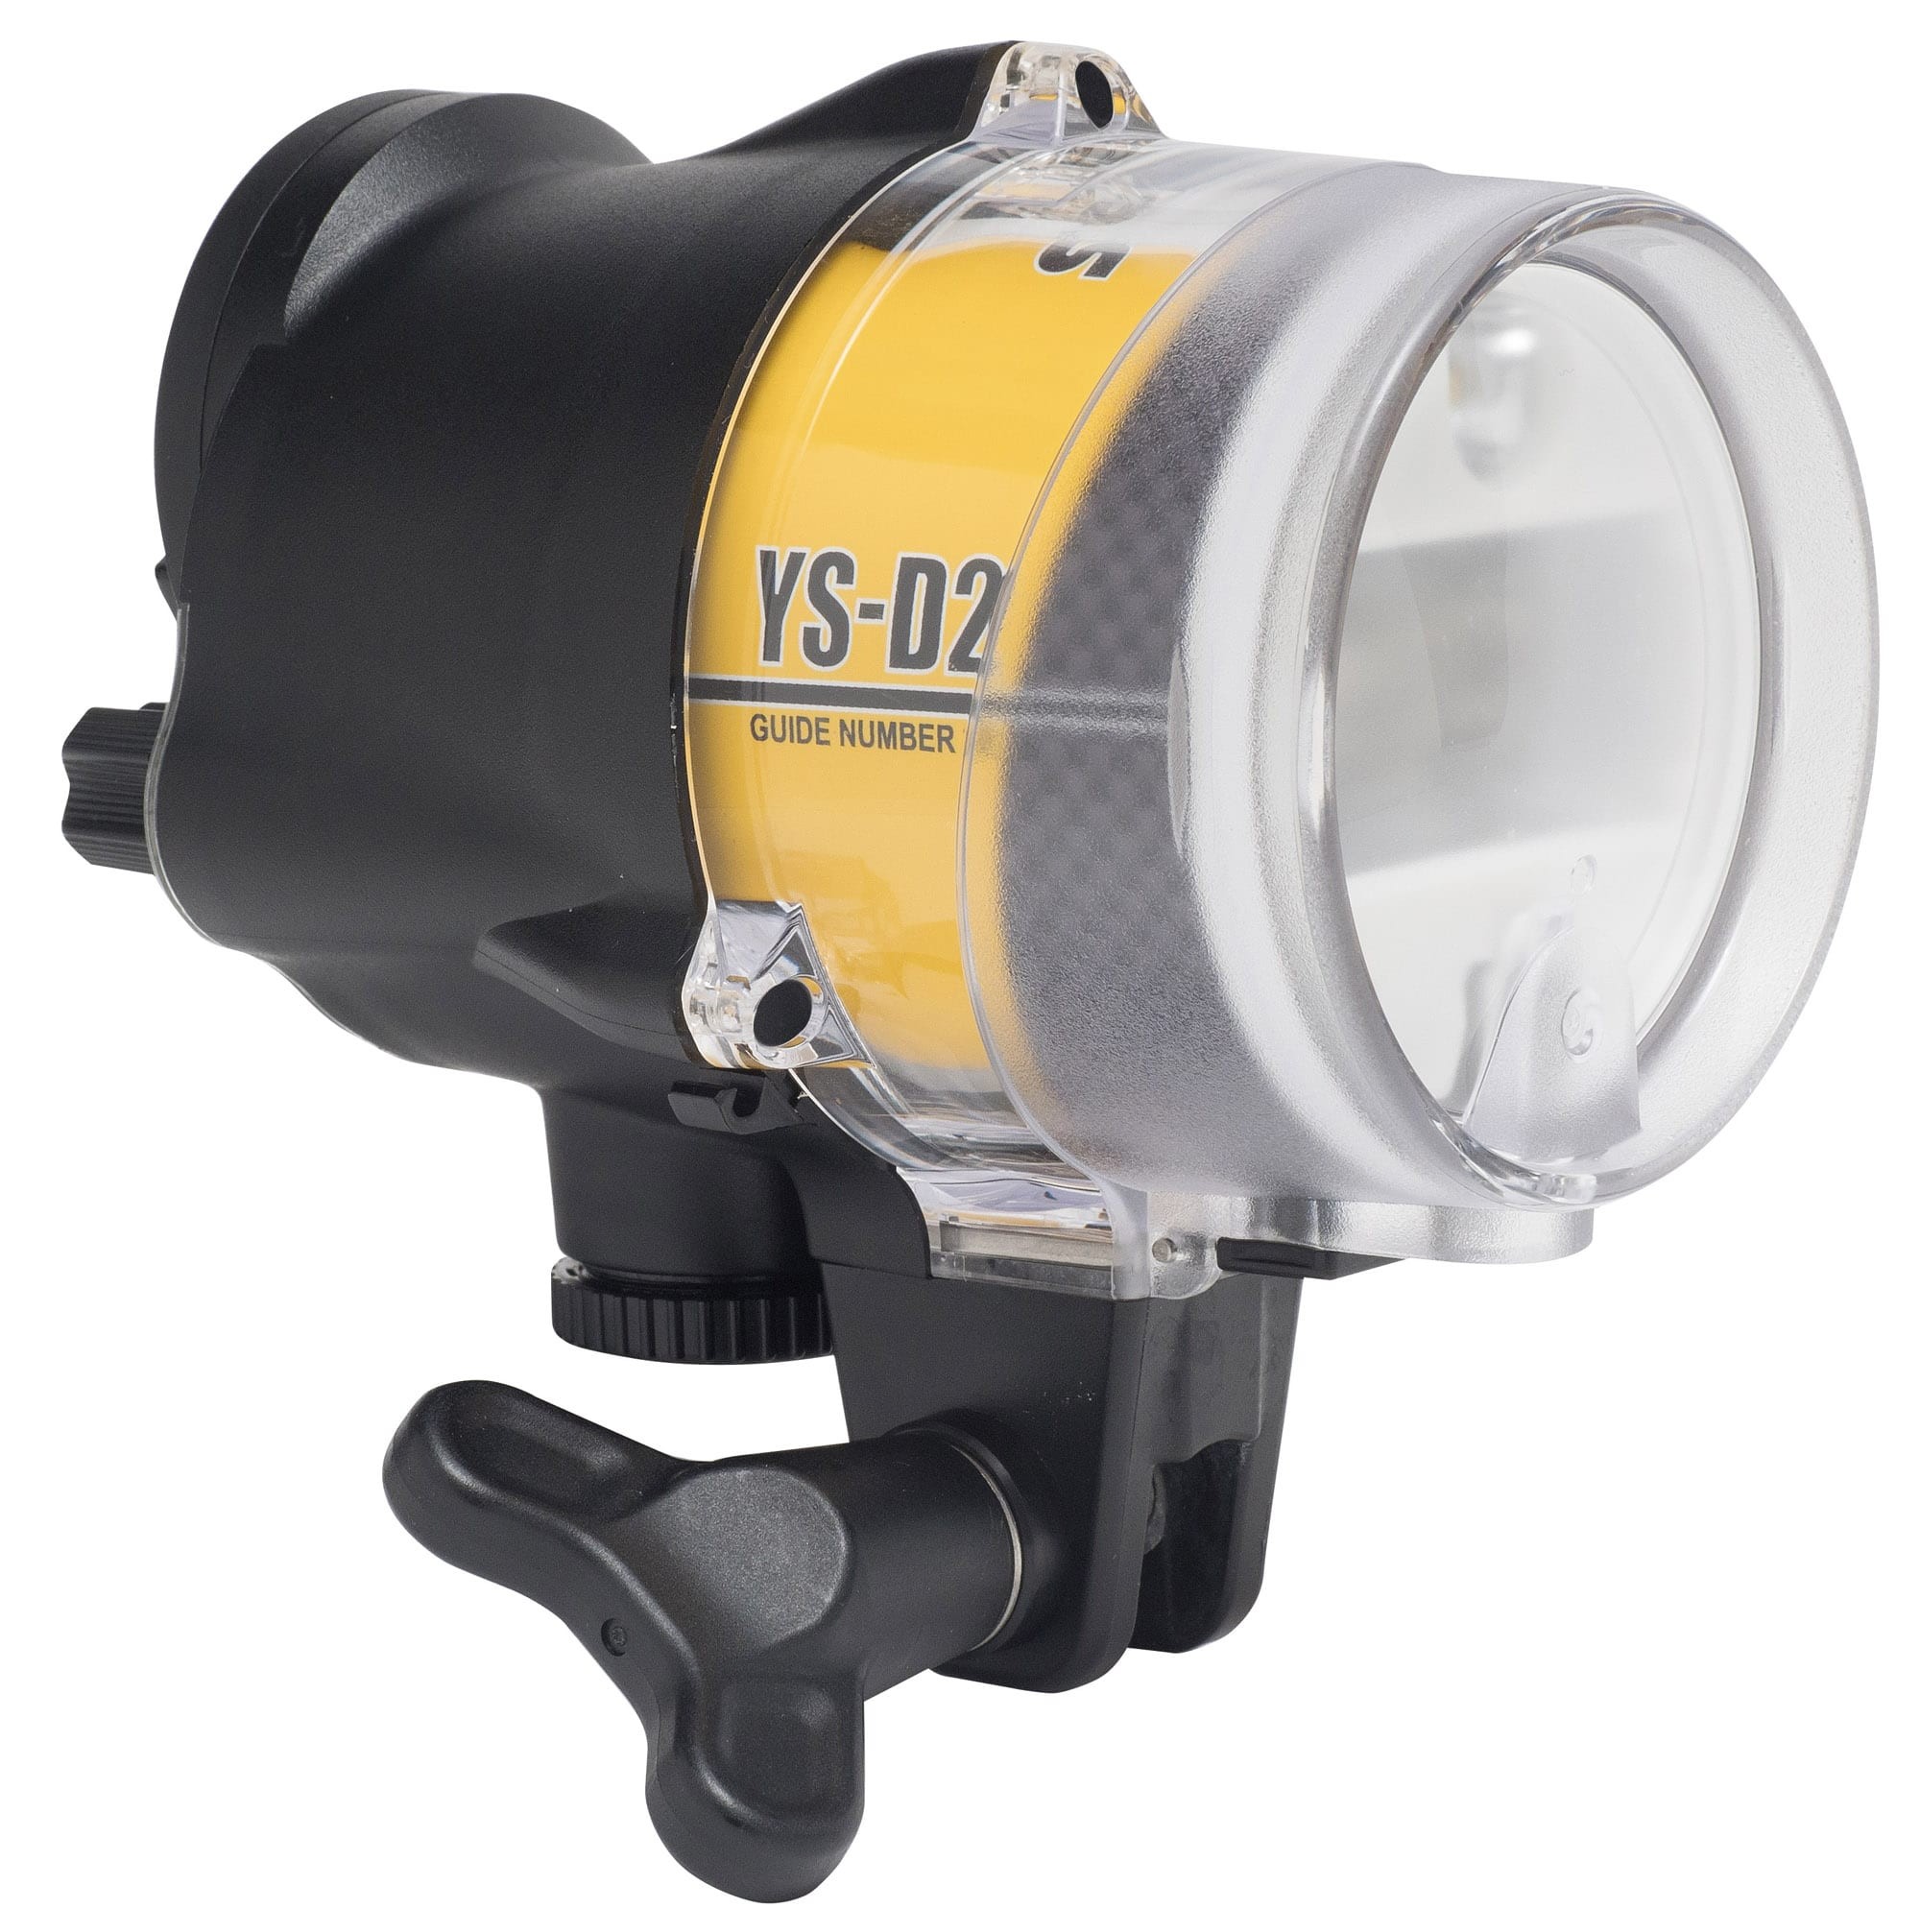 New Version of YS-D2 Strobe From SEA&SEA Now Available